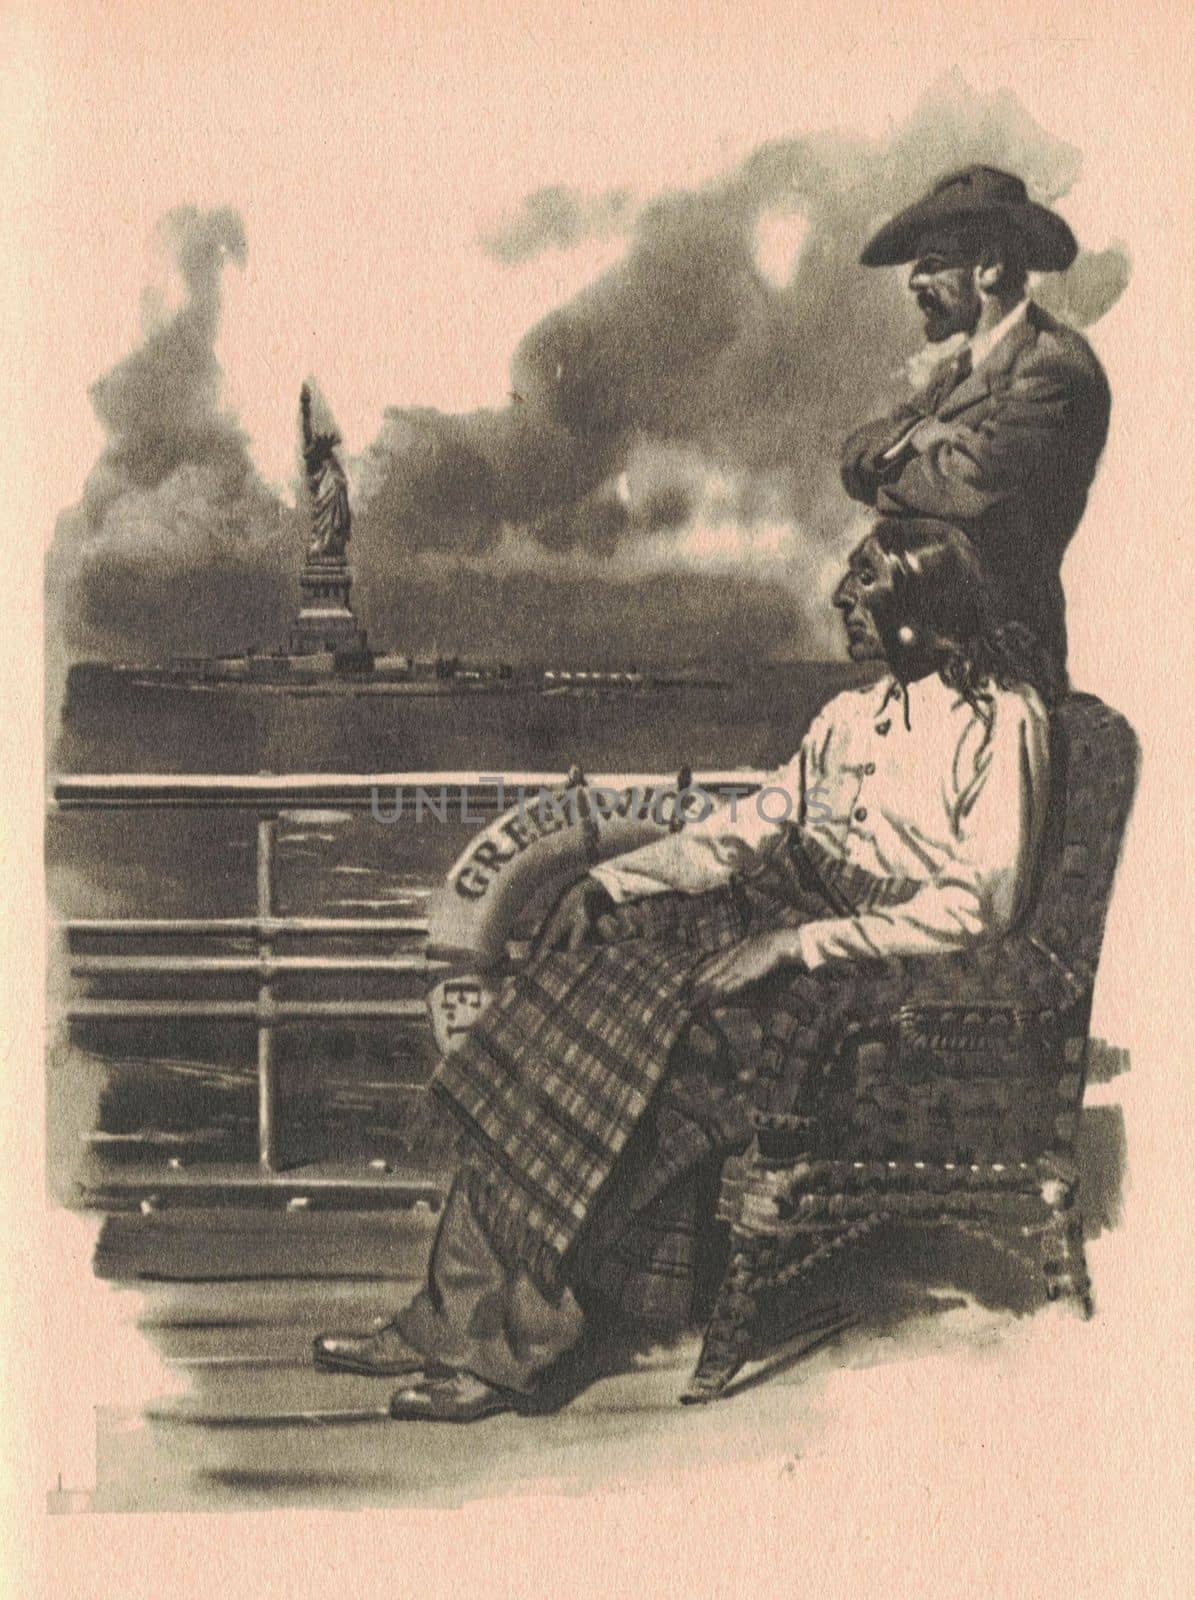 Black and white illustration shows an old American Indian and a white man on board. Drawing shows life in the Old West. Vintage black and white picture shows adventure life in the previous century by roman_nerud